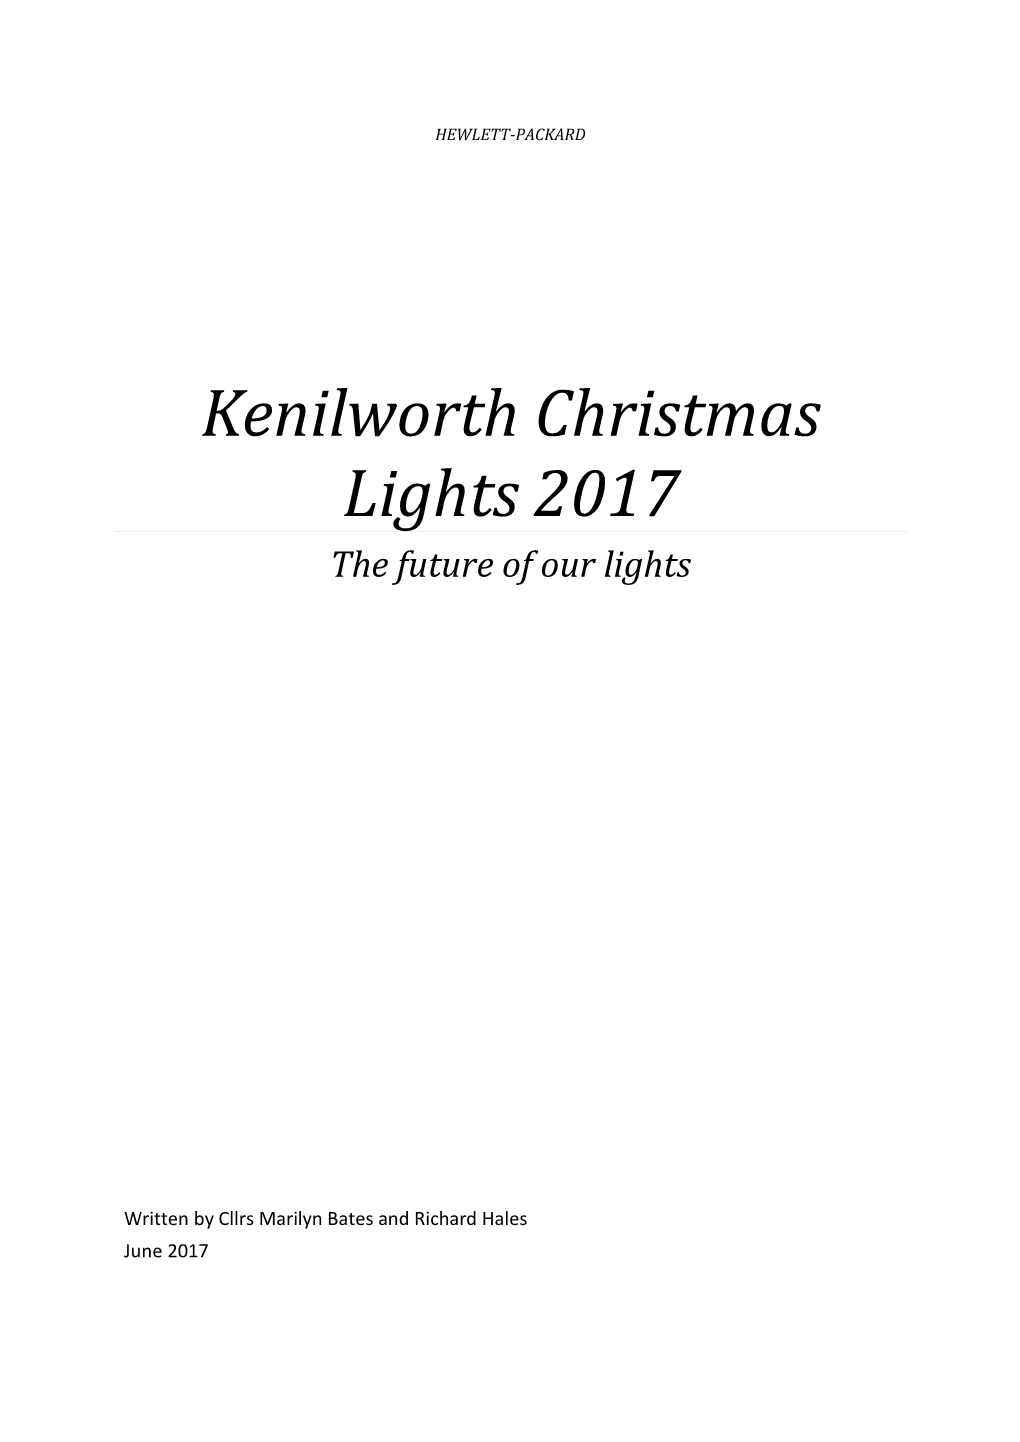 Kenilworth Christmas Lights 2017 the Future of Our Lights